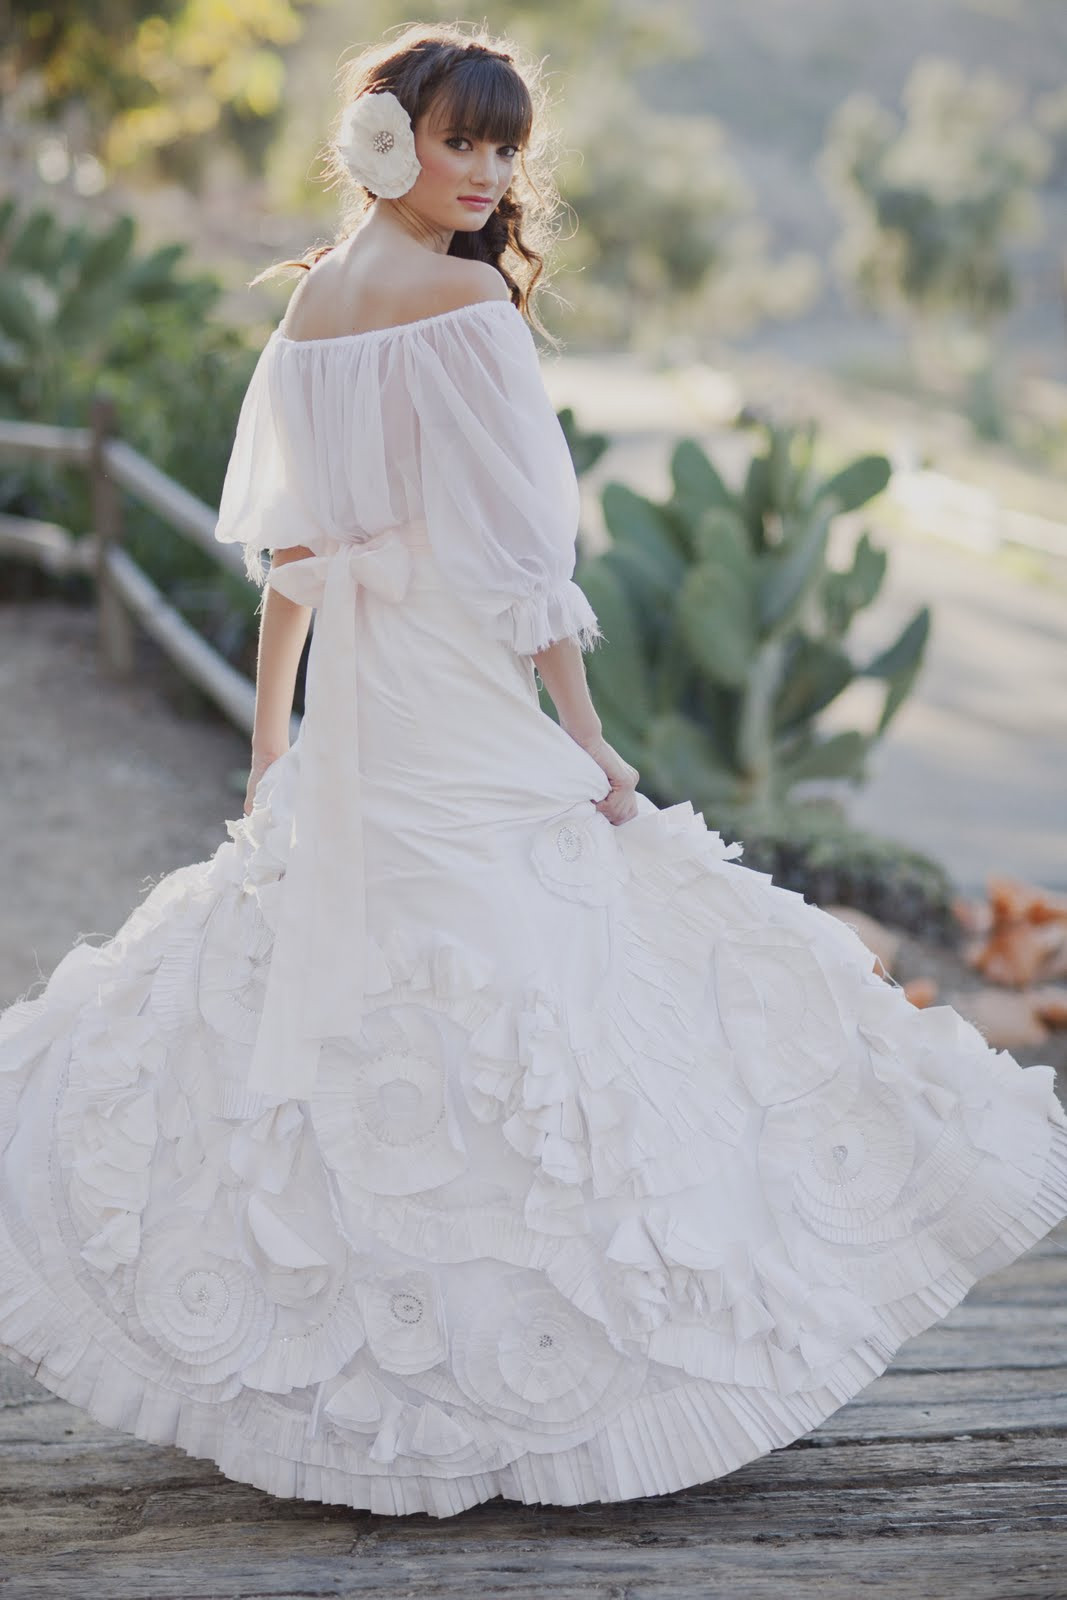 Mexican Wedding Dresses
 Spanish Bridal Fashion with Mexican Wedding Inspiration